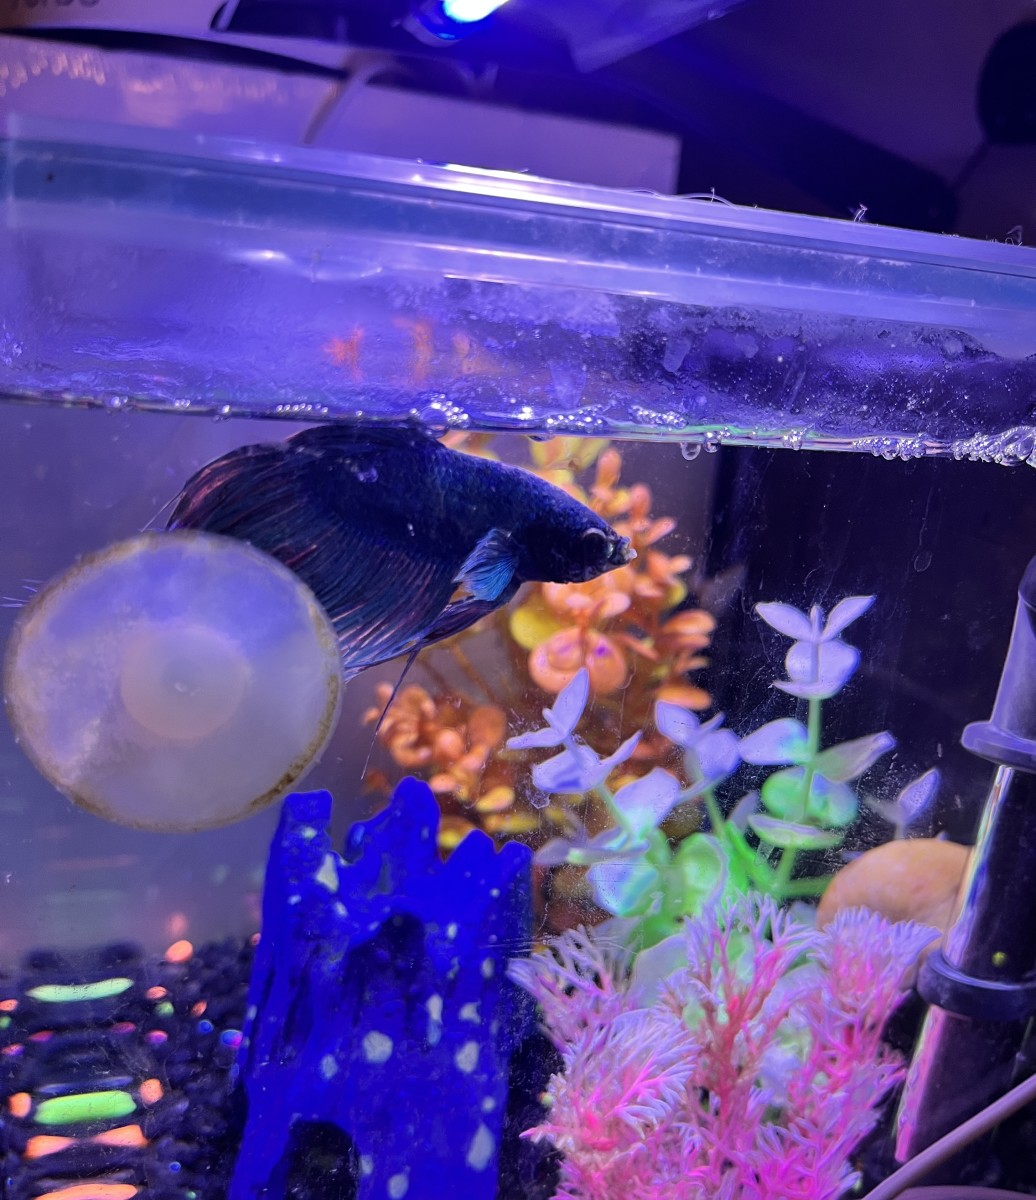 After using the Lifeguard medicine and improving the water quality in his tank, my beautiful blue betta fish was quickly back to his old self.